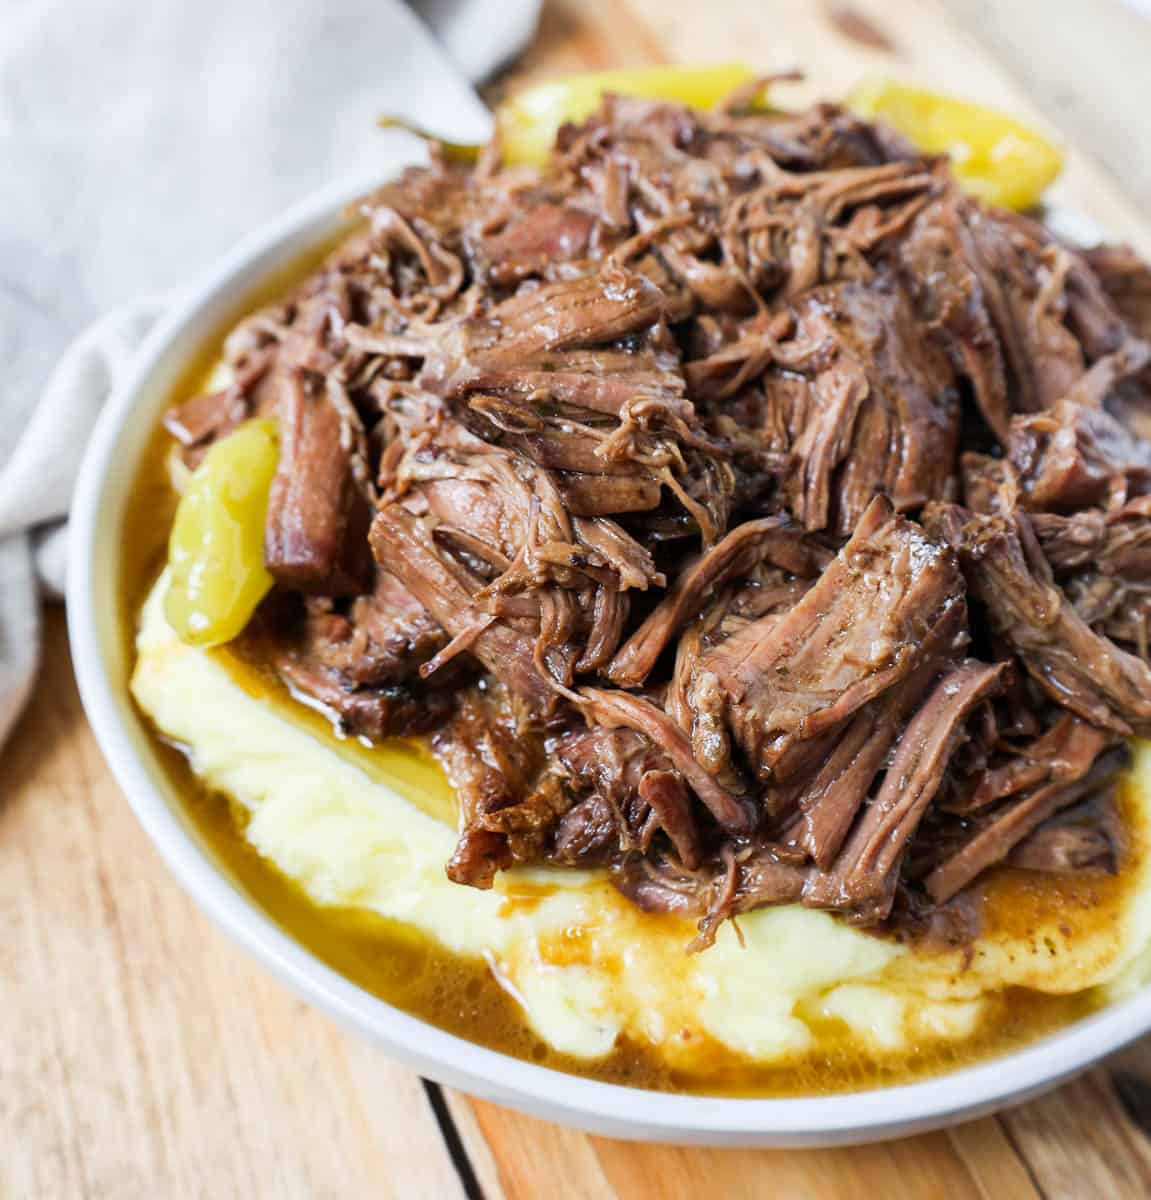 This Mississippi Pot Roast Recipe with mashed potatoes is the most tender, flavorful, melt-in-your-mouth beef roast recipe and is made with only five ingredients. This is the best beef pot roast recipe ever and is slow cooked in a crockpot.